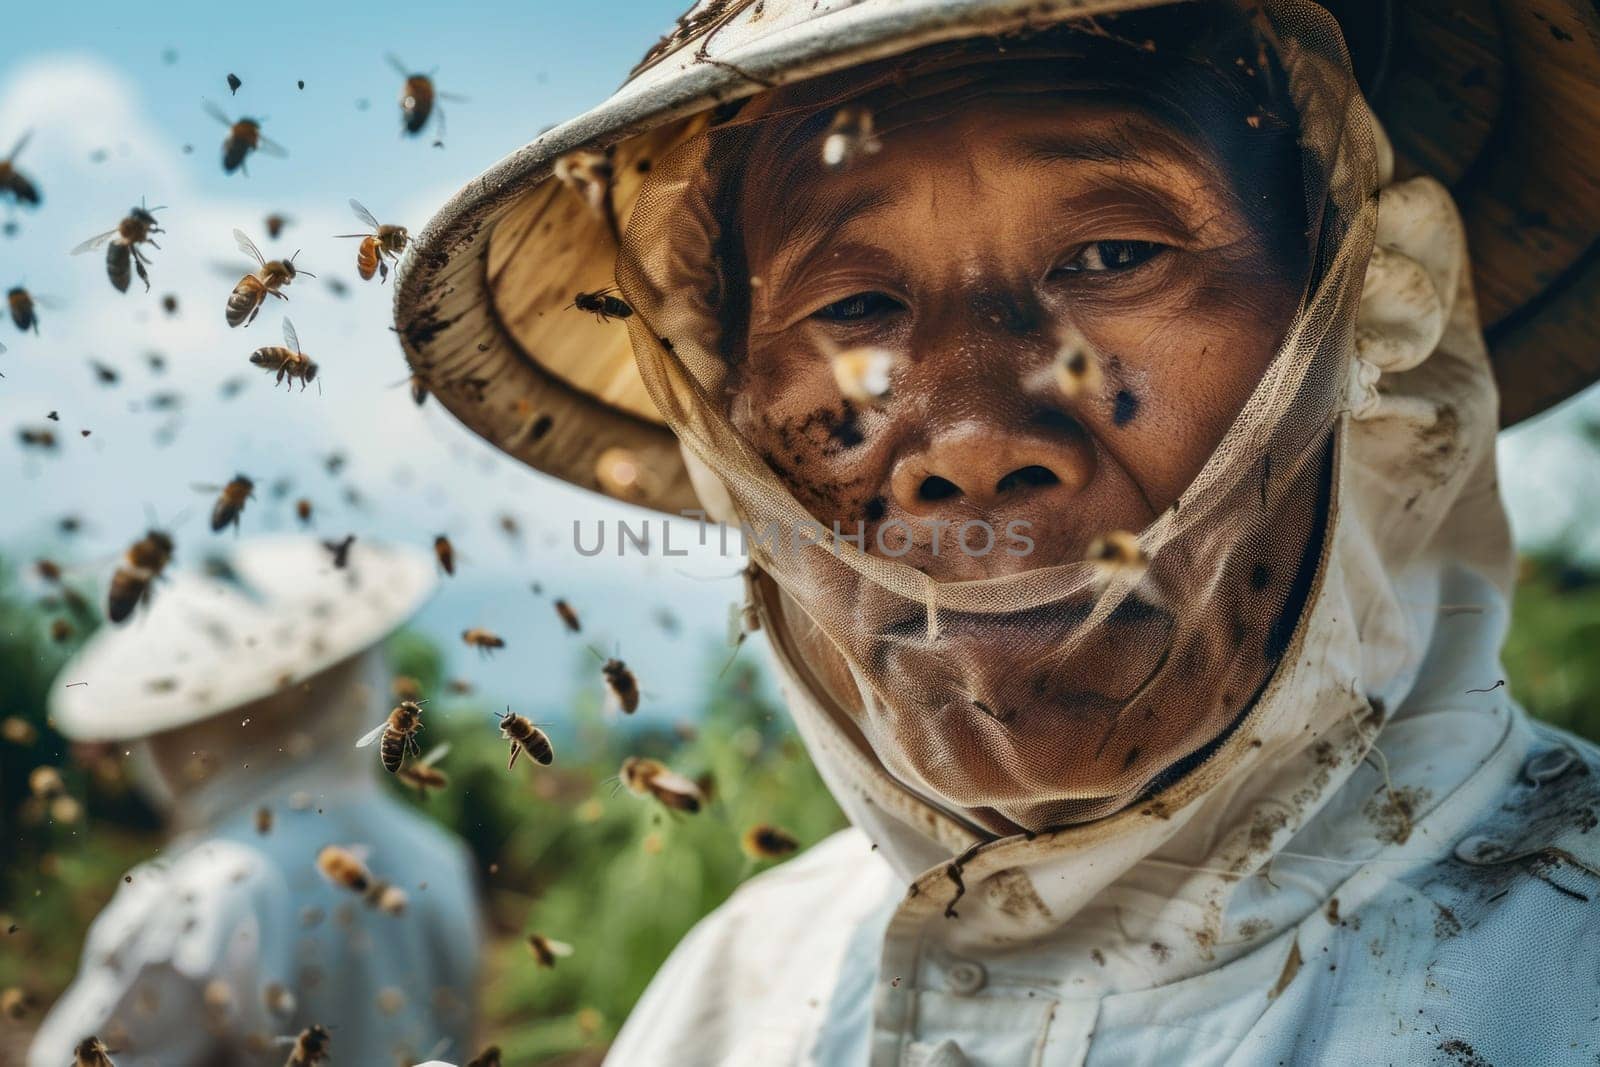 Asian man surrounded by swarm of bees wearing beekeeper's hat in a medical beekeeping demonstration